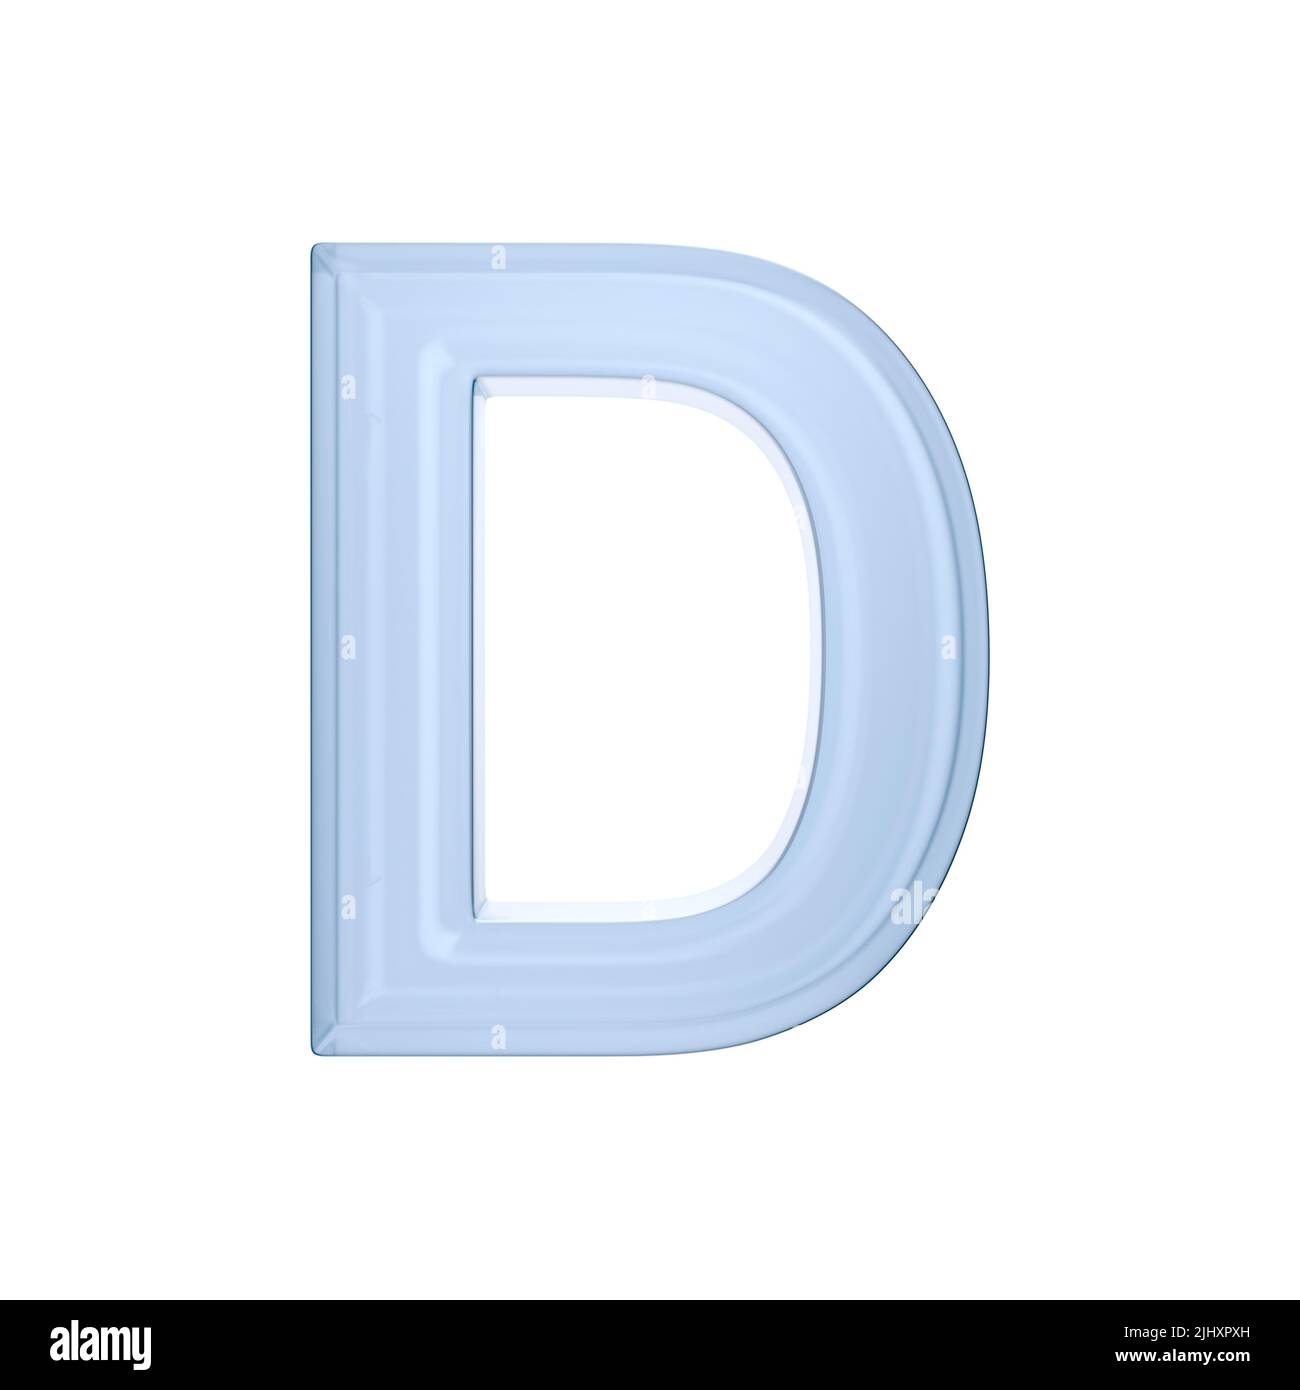 Character D on white background. Isolated 3D illustration Stock Photo